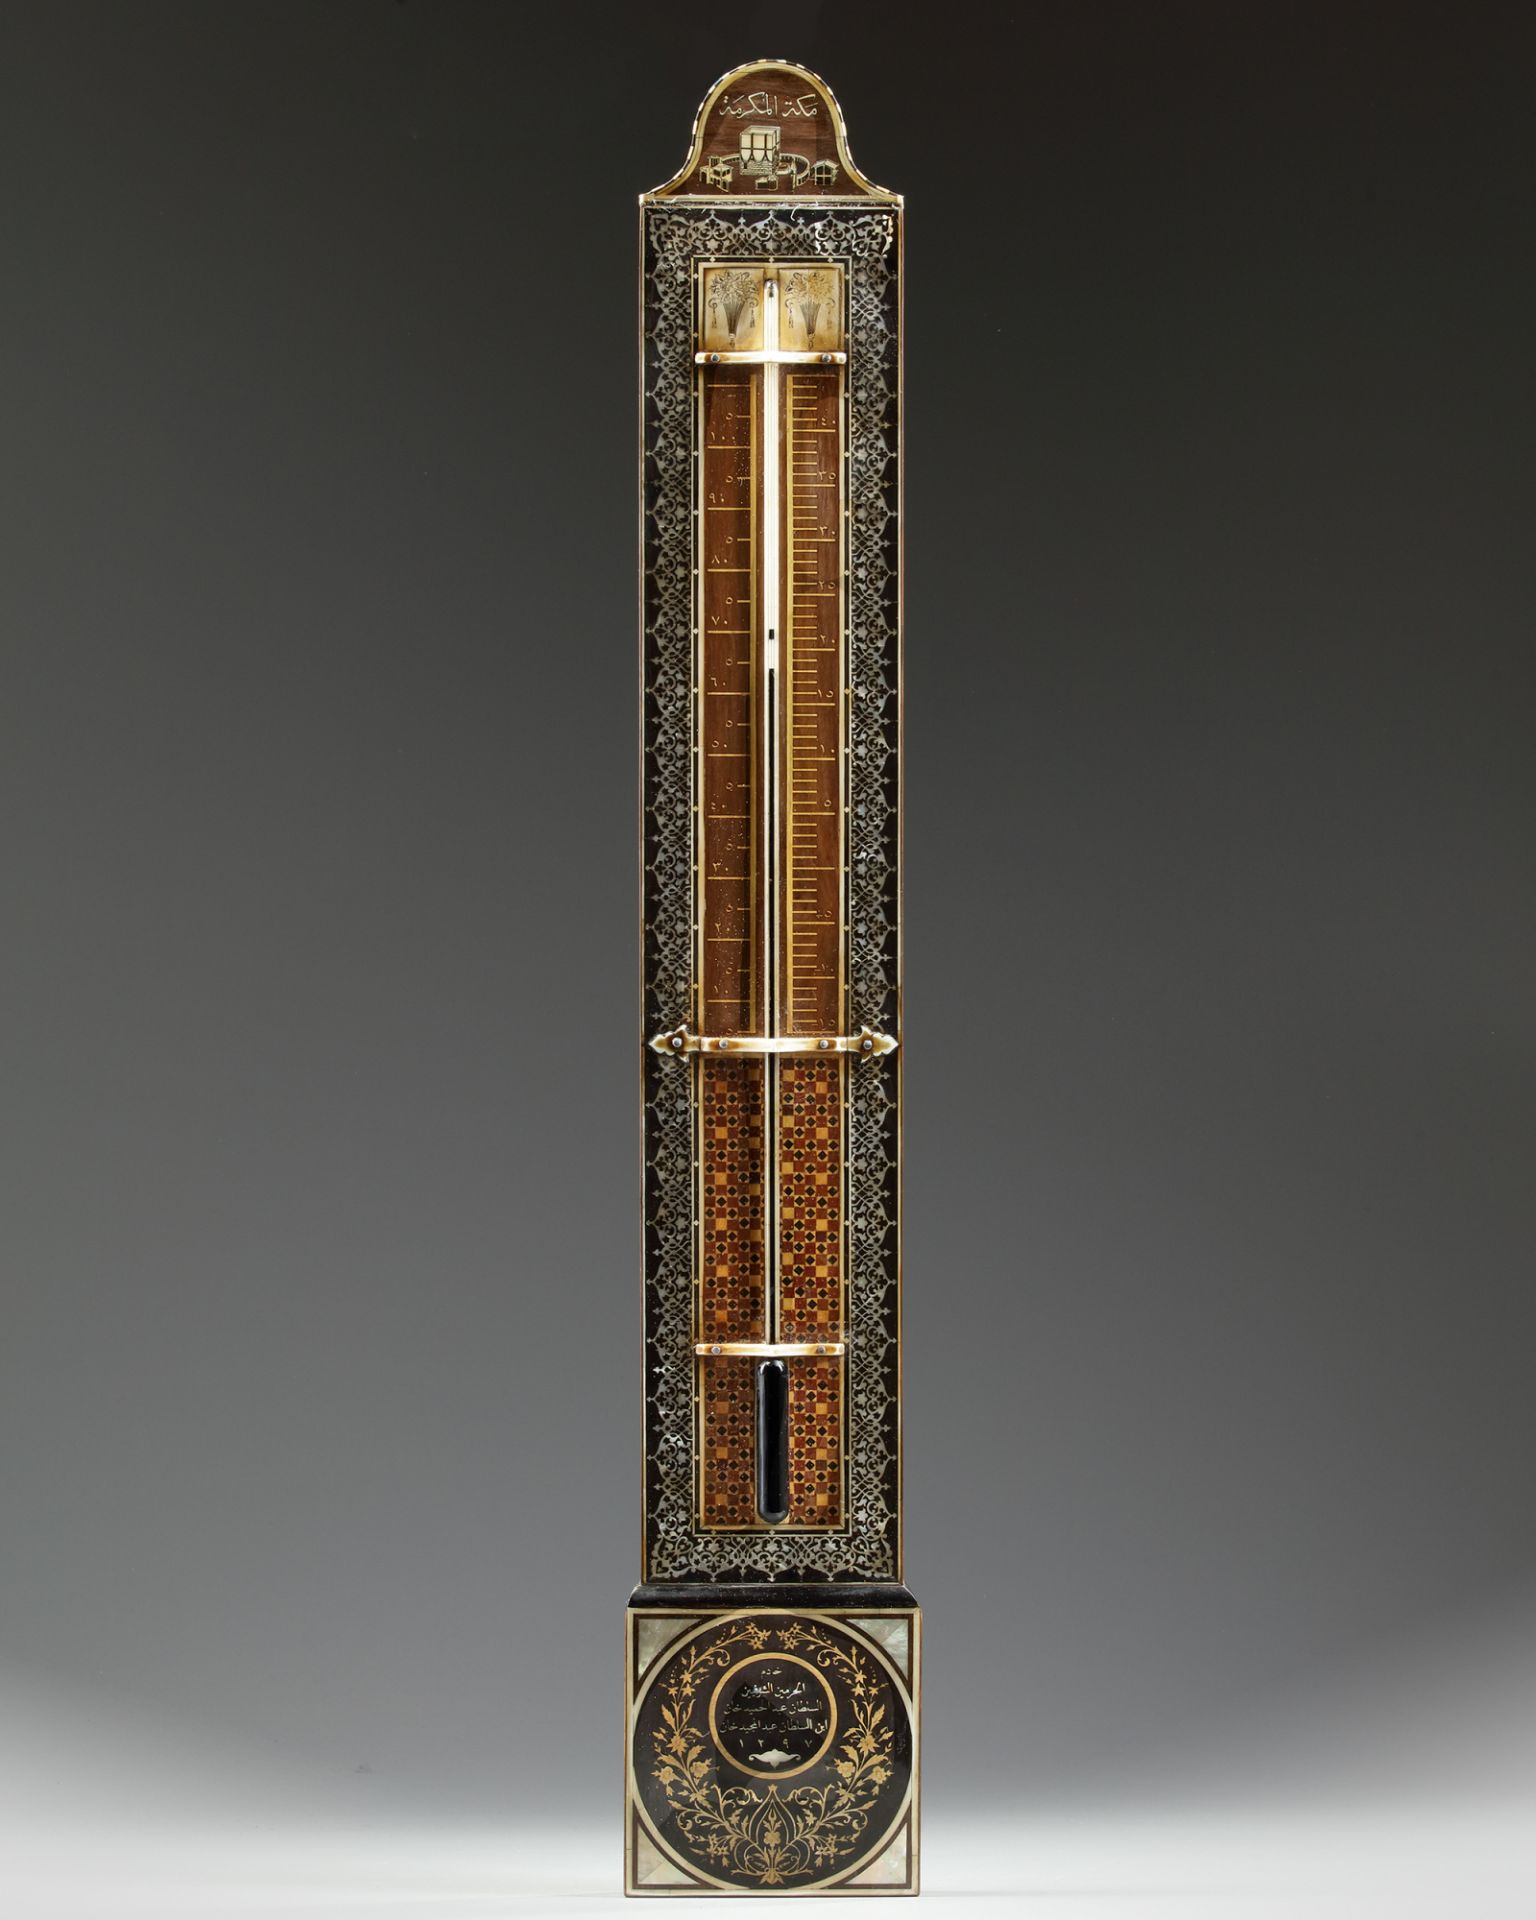 AN OTTOMAN WOODEN MOTHER-OF-PEARL AND IVORY INLAID BAROMETER,1297 AH/1879 - 1880 AD - Image 6 of 12